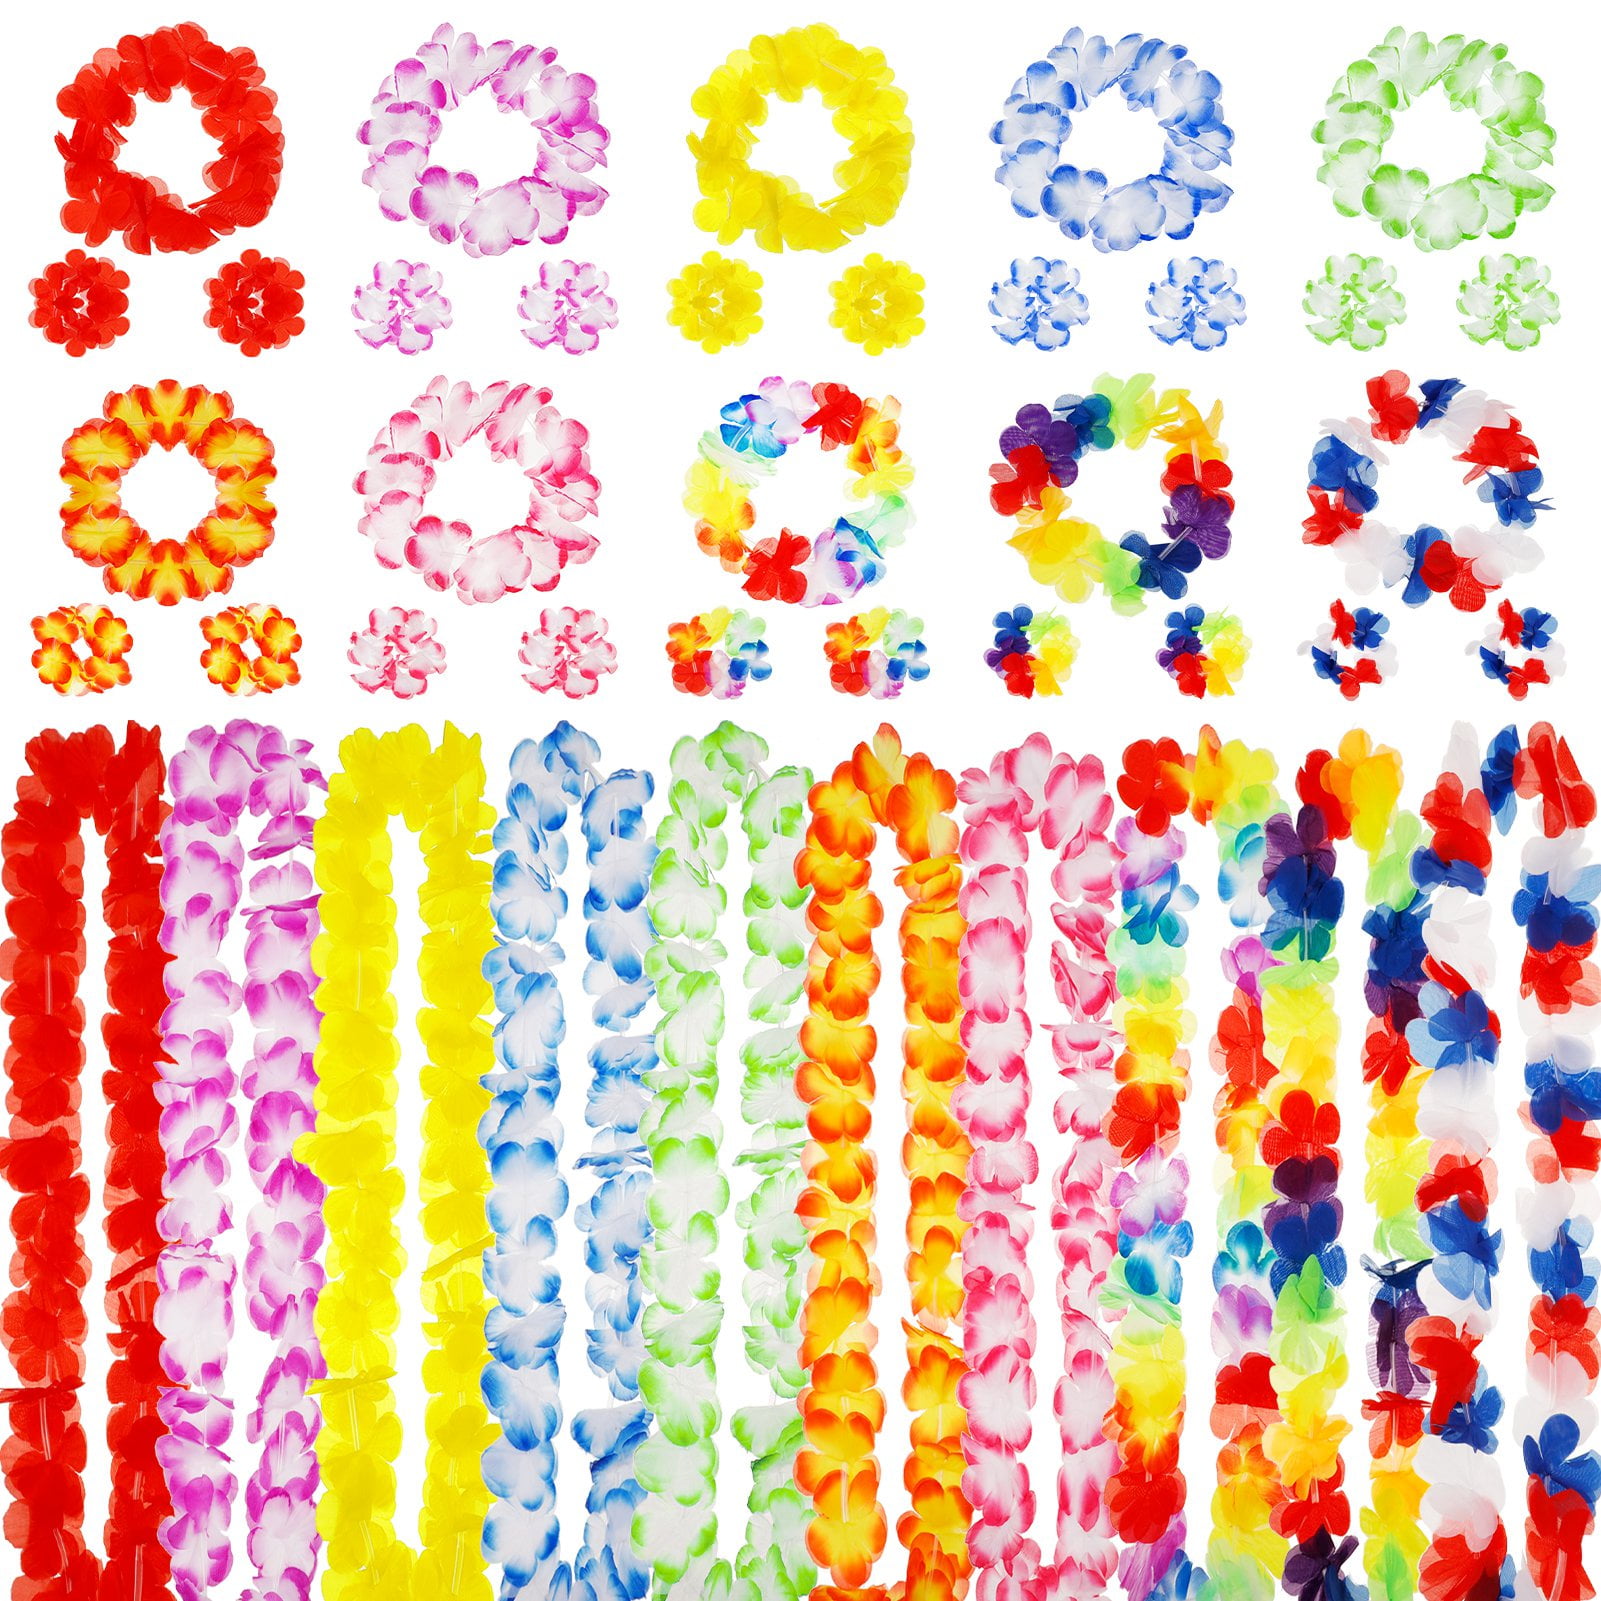 BUBABOX 40 Pack Hawaiian Flower Leis,41 Inch Tropical Luau Party Supplies Flower Hair Clip and Elastic Wristbands for Hawaii Decorations,Beach Theme Party Decorations(Multicolor) - image 1 of 8